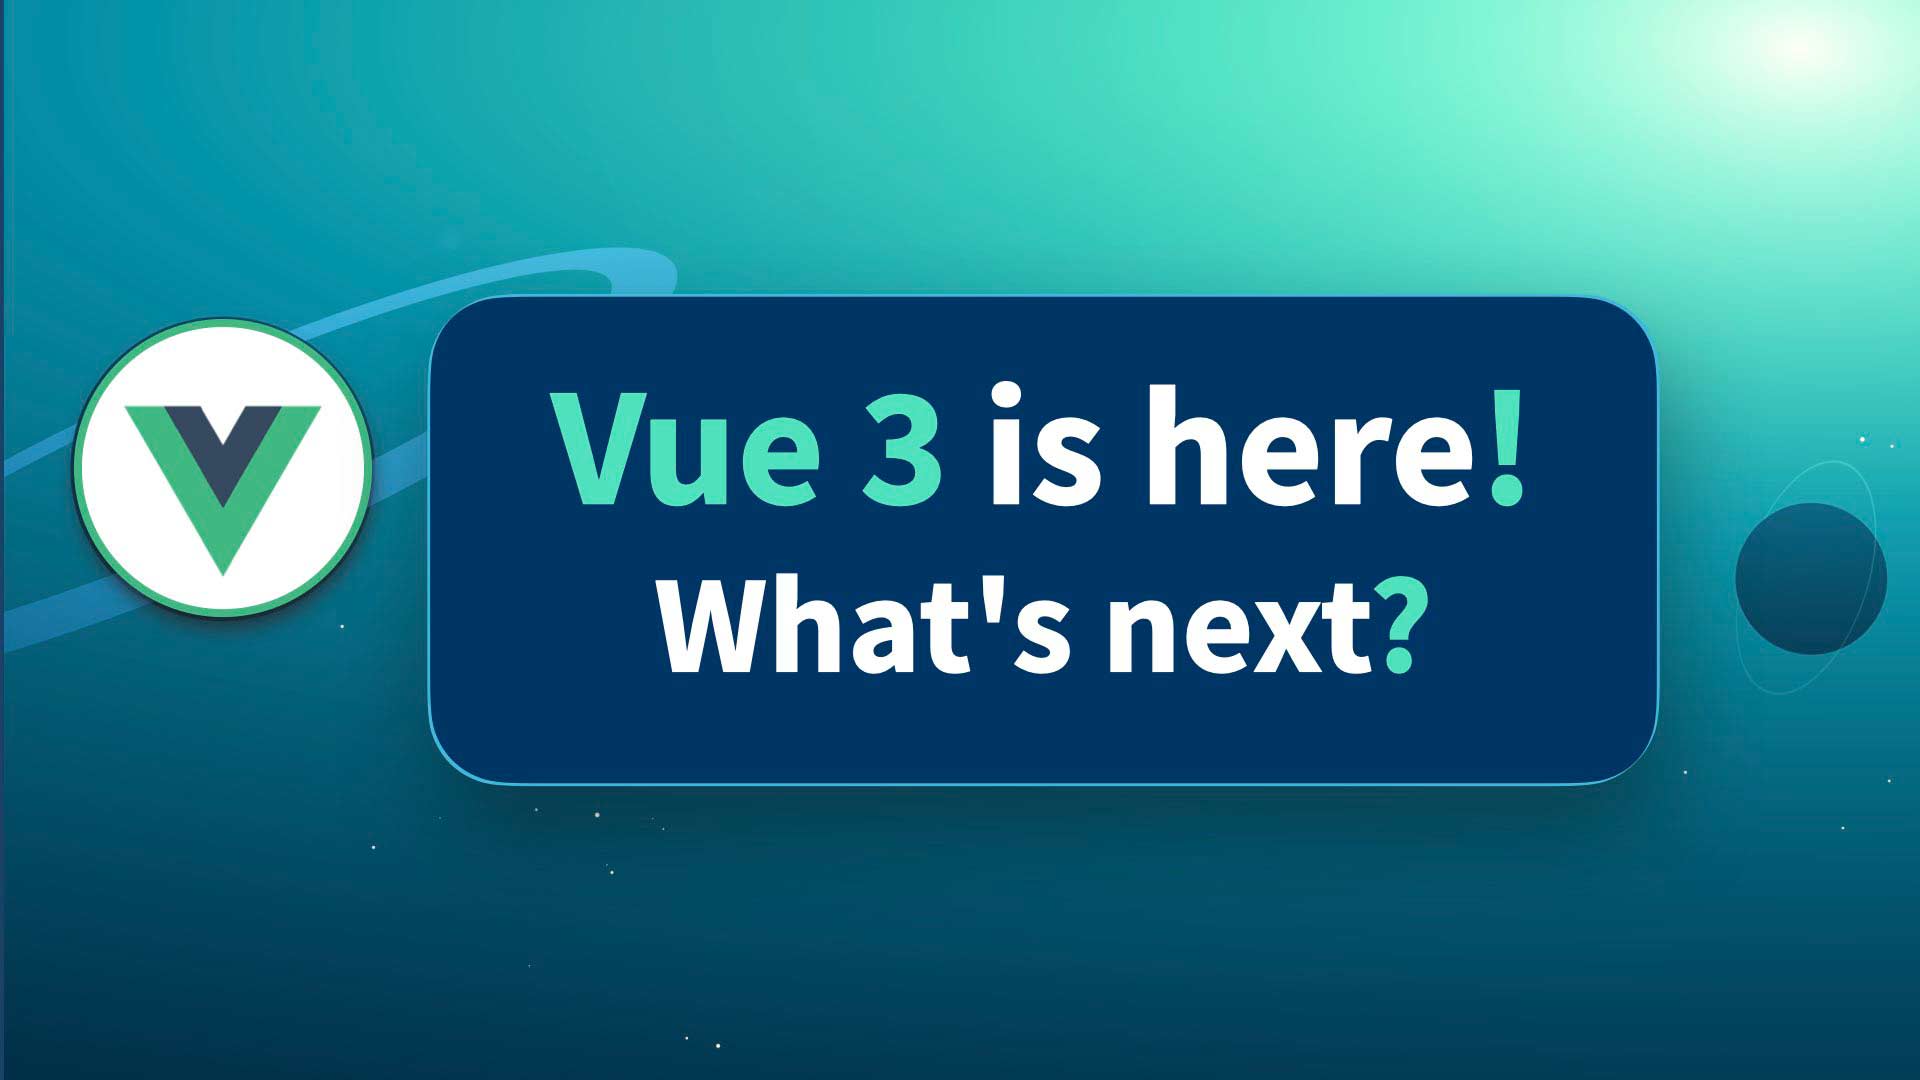 Vue 3.0 is here! What's next?